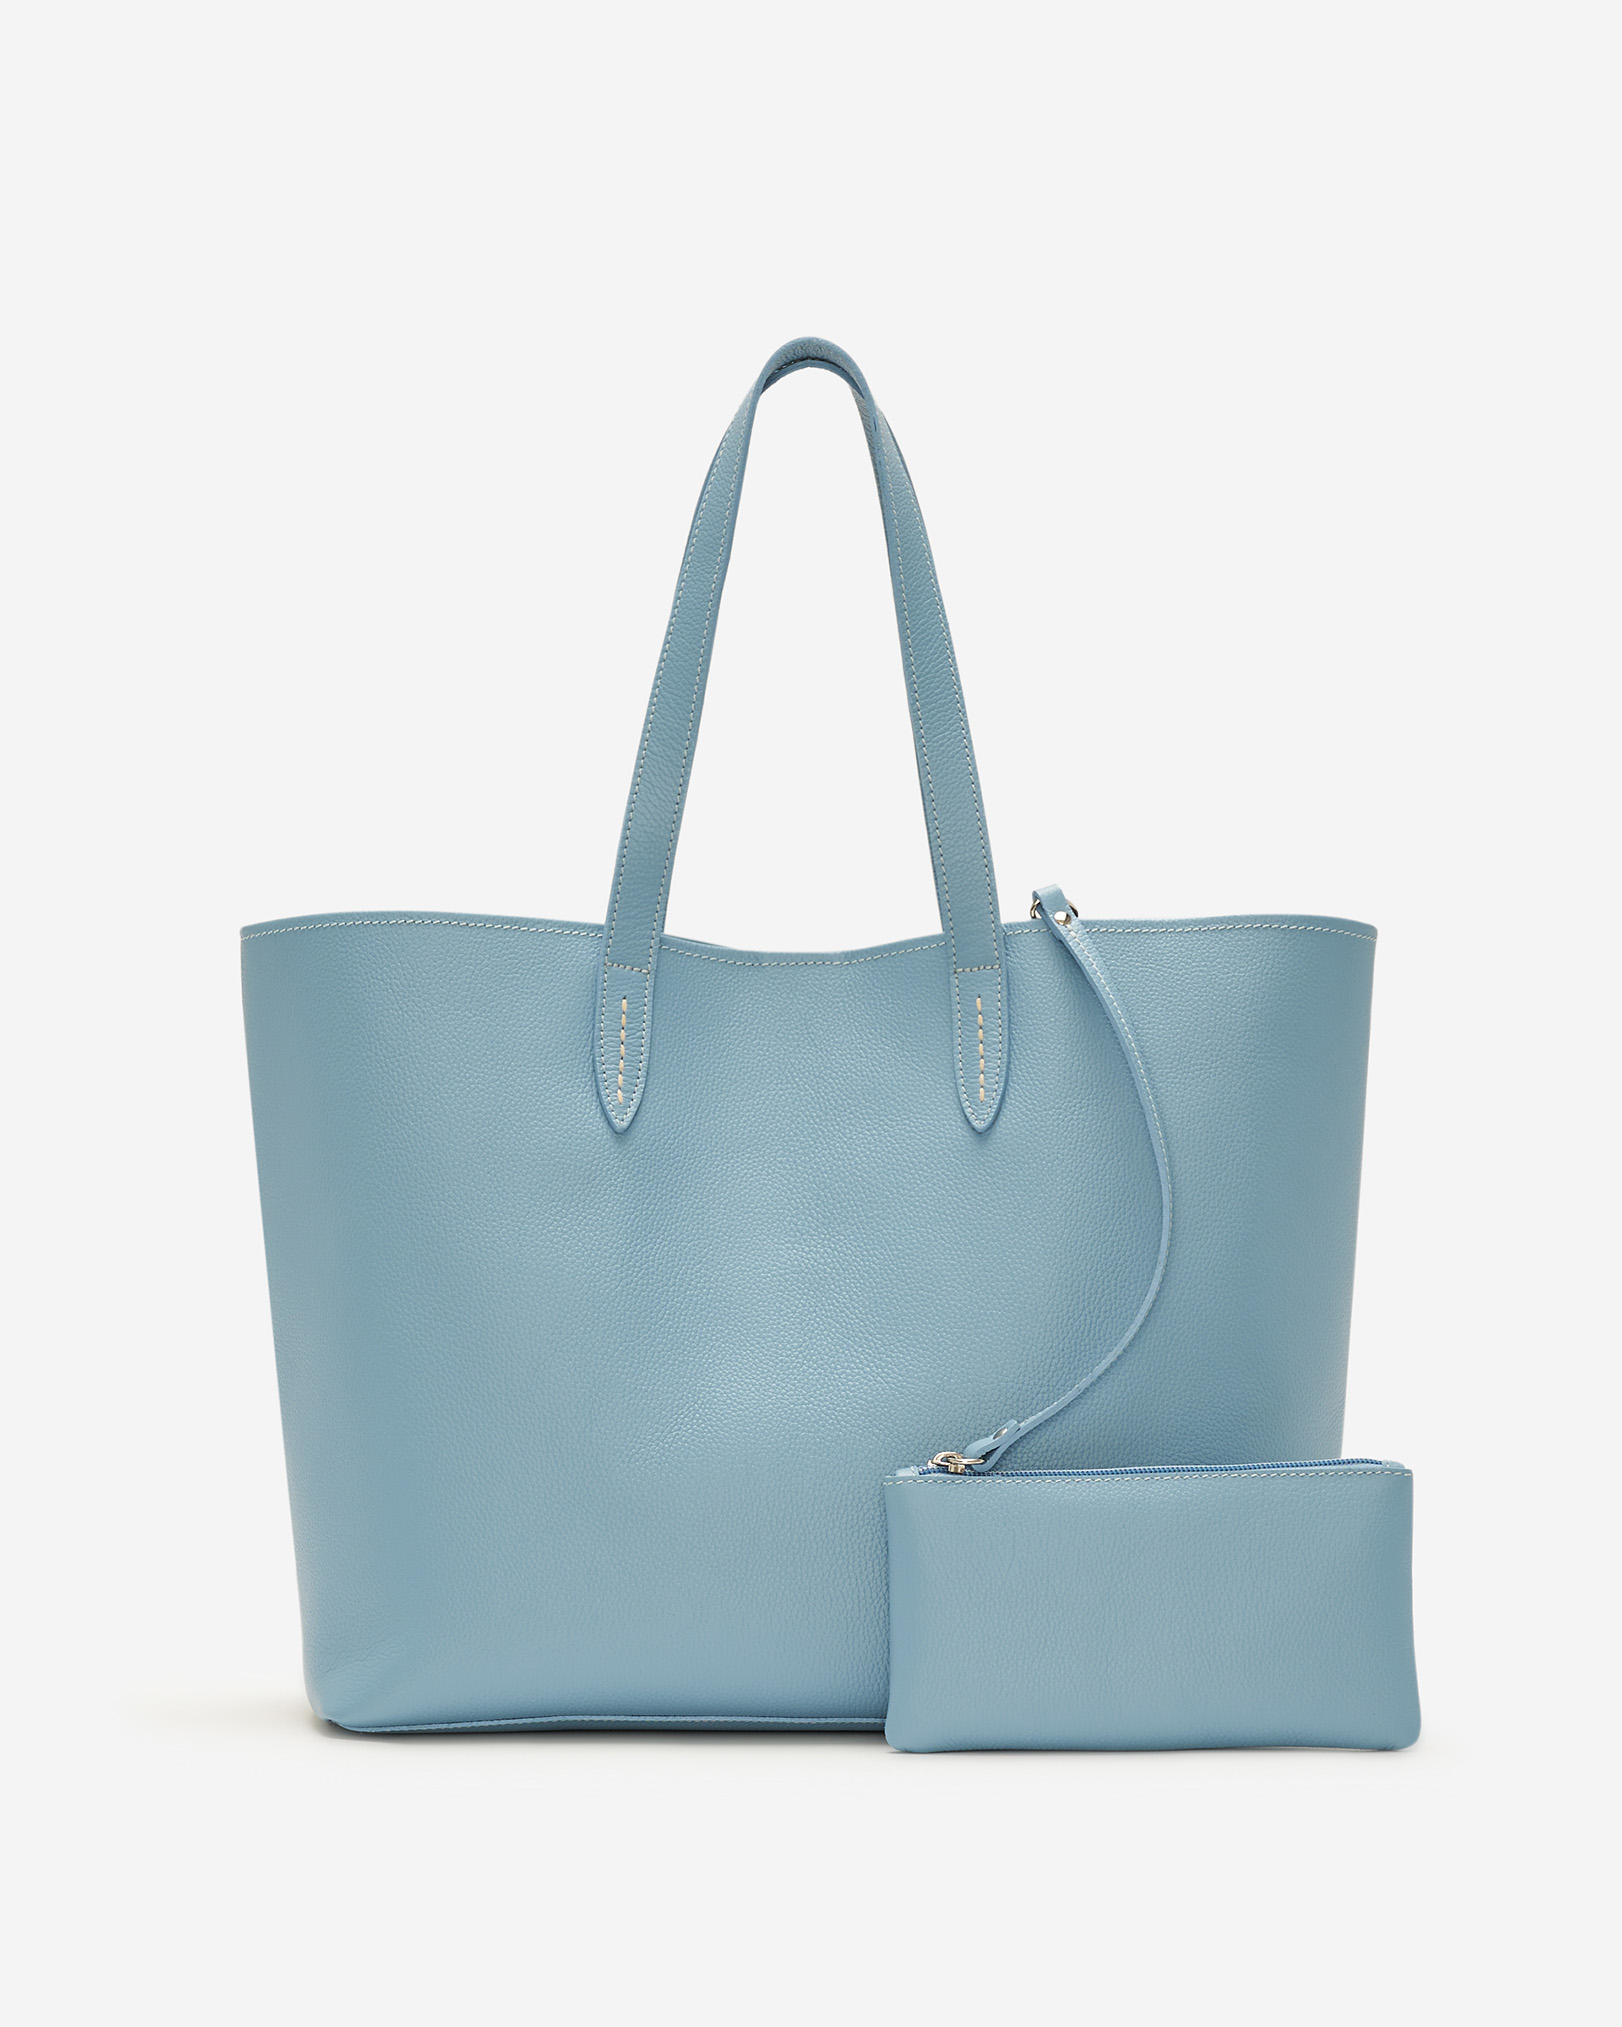 Roots Carryall Tote Cervino in Blue Sky/Navy